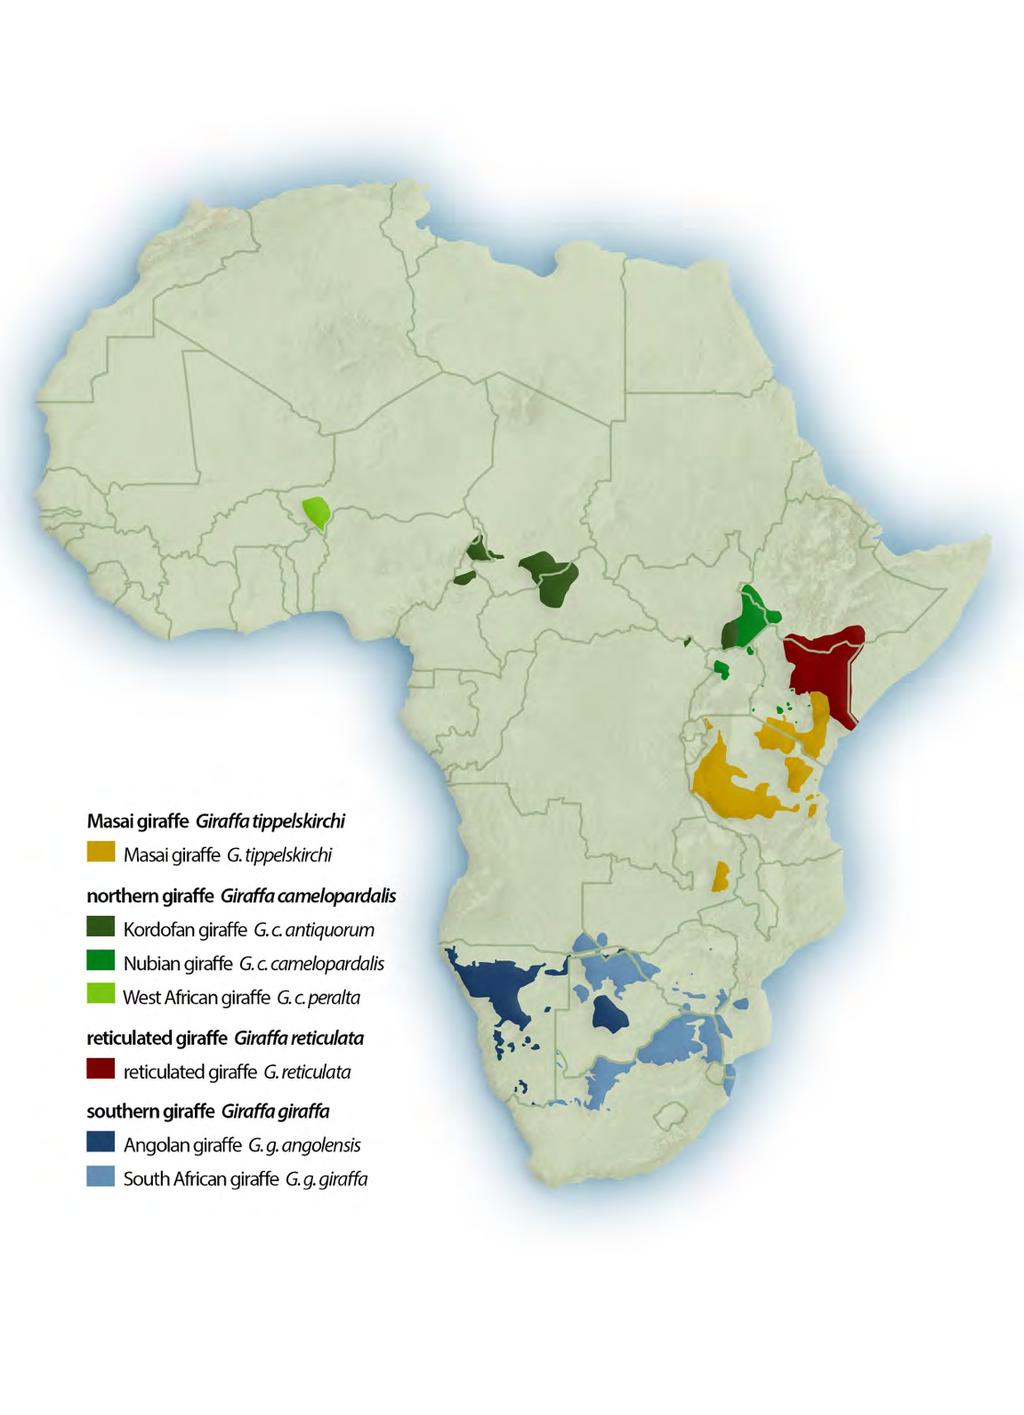 Africa- wide Giraffe Range Map Source: GCF 2016 Guiding Principles Given the complexity of the threats facing Africa s giraffe and the diverse suite of conservation measures required to protect and